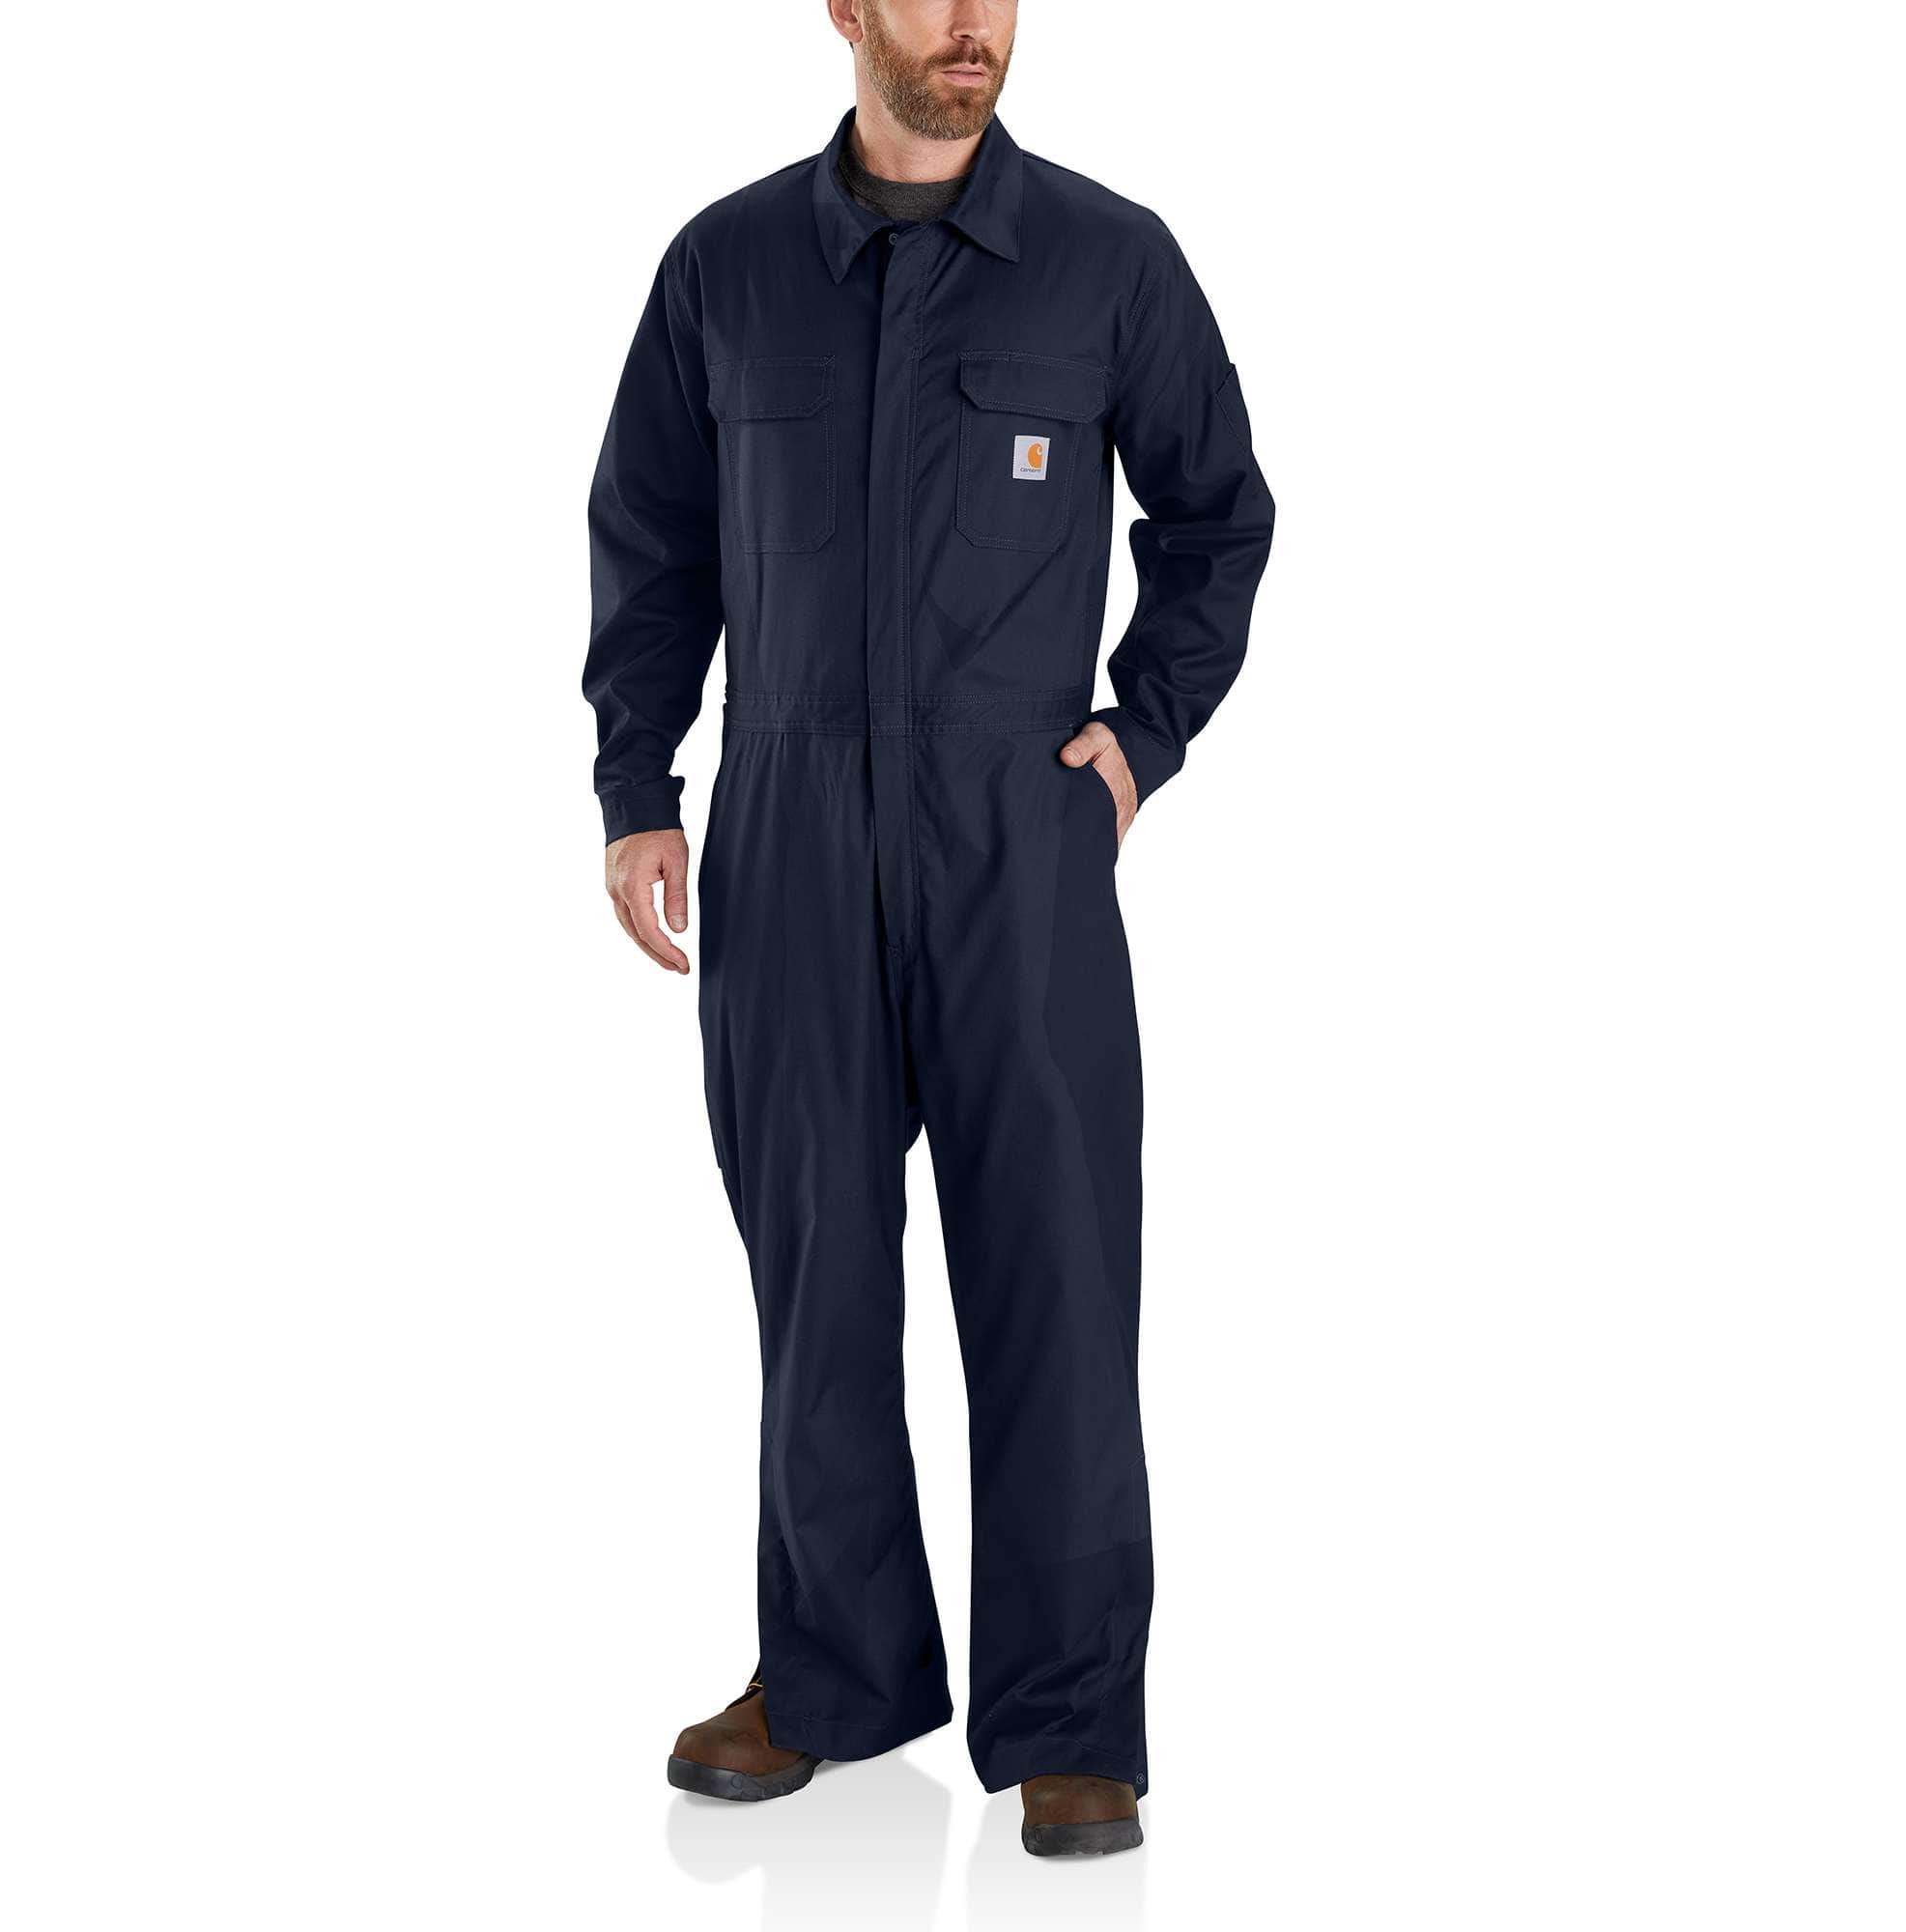 Rugged Flex® Canvas Coverall | Father's Day Gift Guide | Carhartt